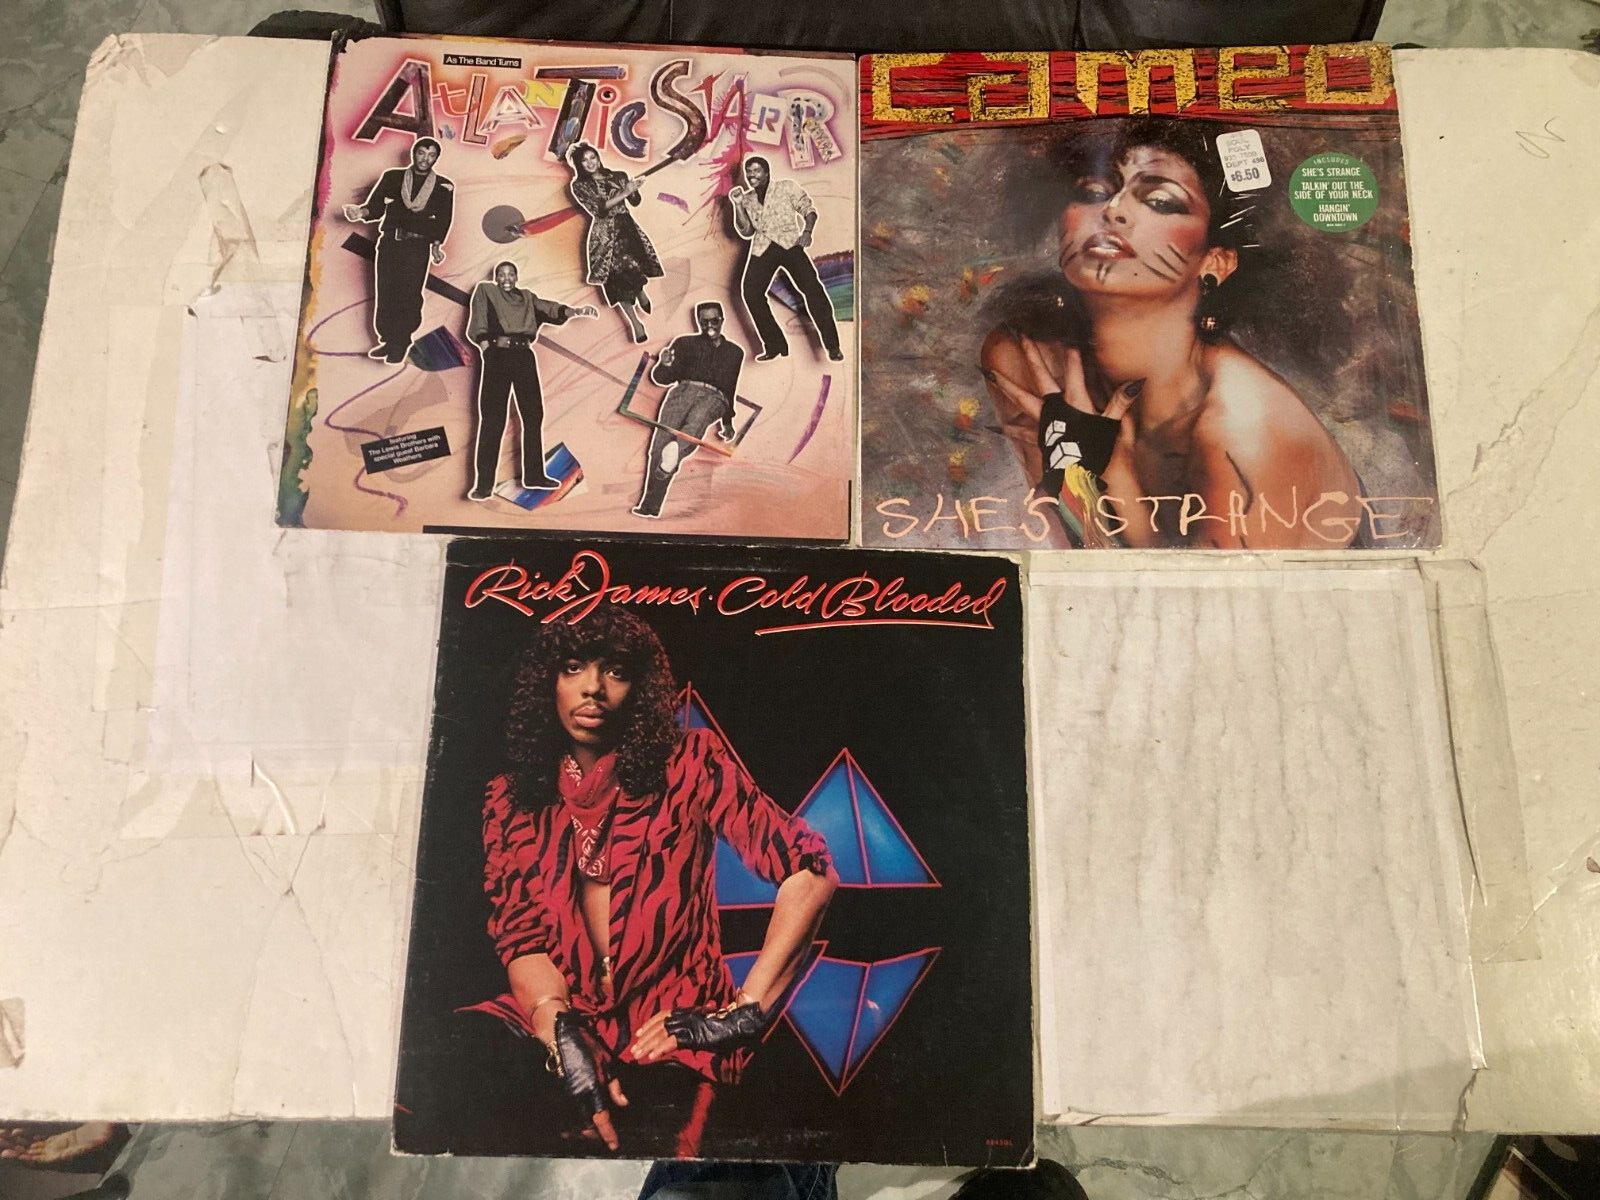 cameo-she's strange-atlantic starr-as the band-rick james-cold blooded-mnt vinyl